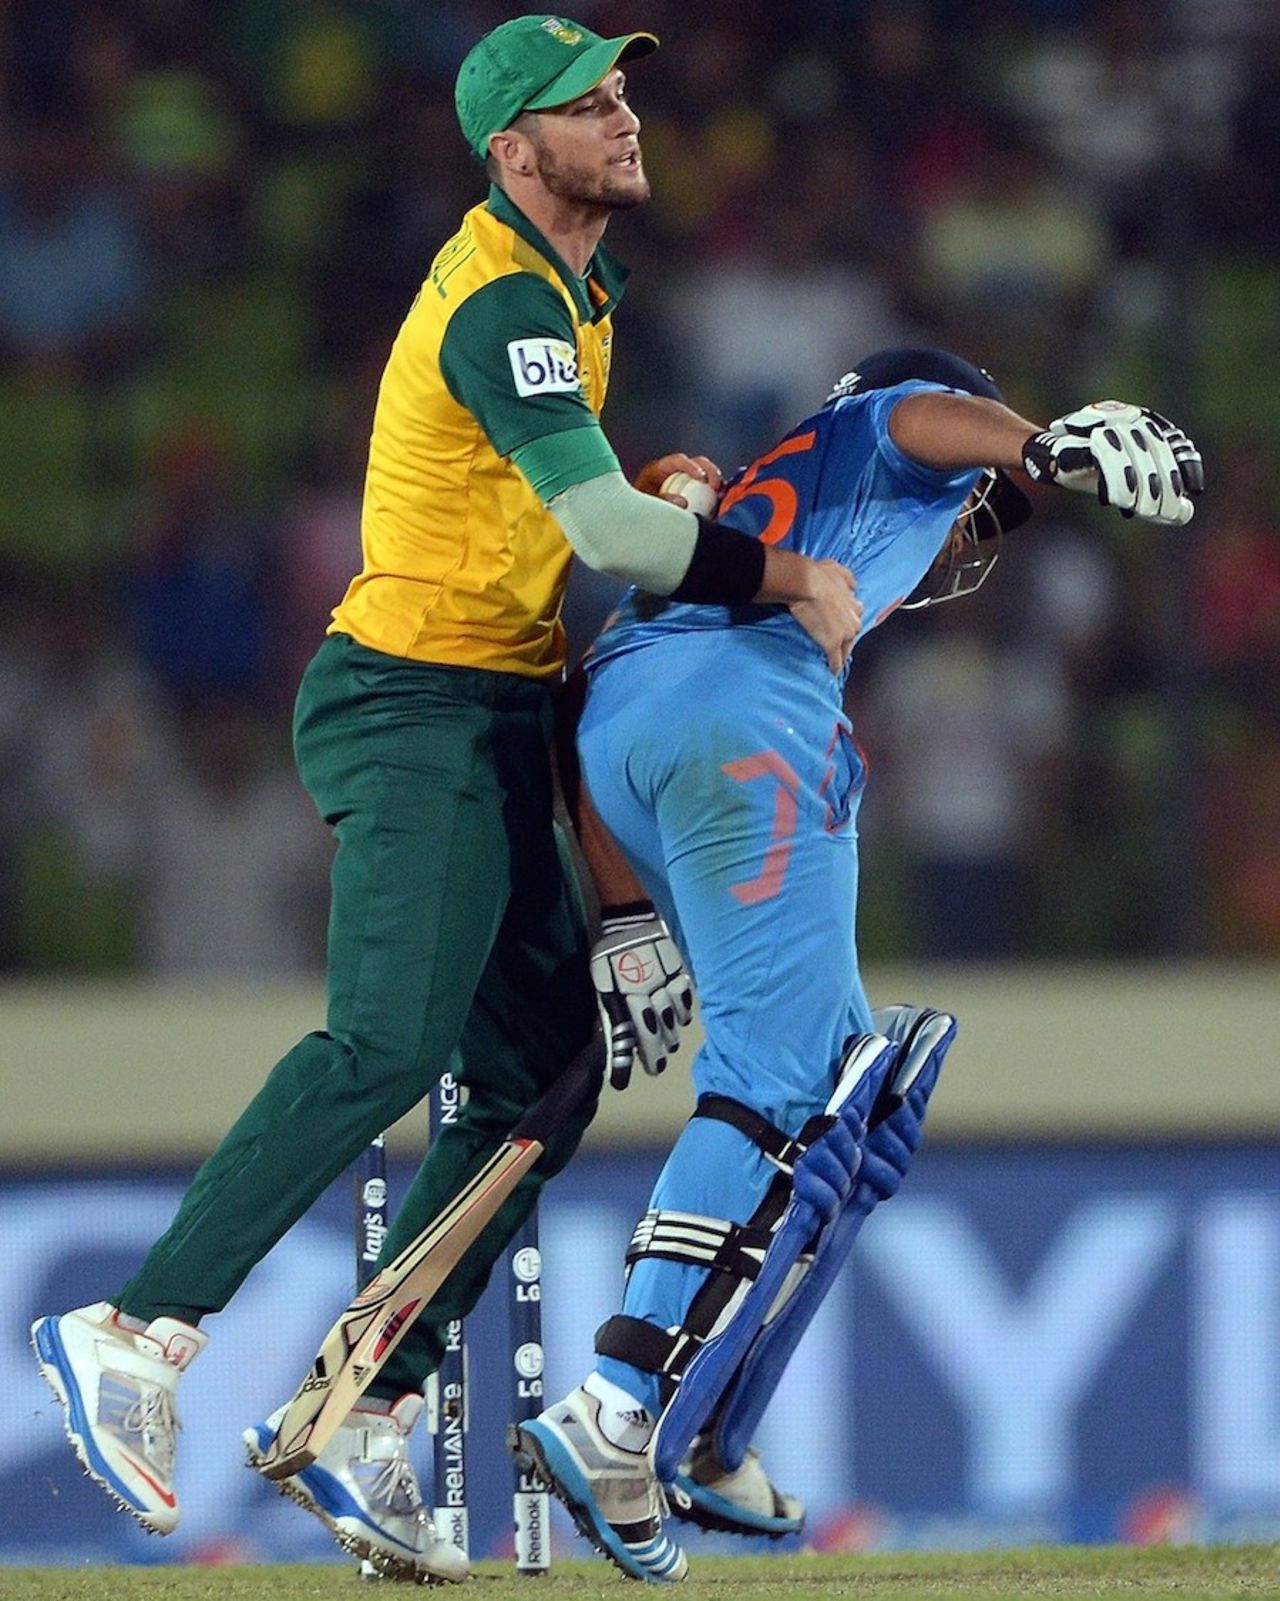 Wayne Parnell collides with Rohit Sharma, India v South Africa, World T20, semi-final, Mirpur, April 4, 2014